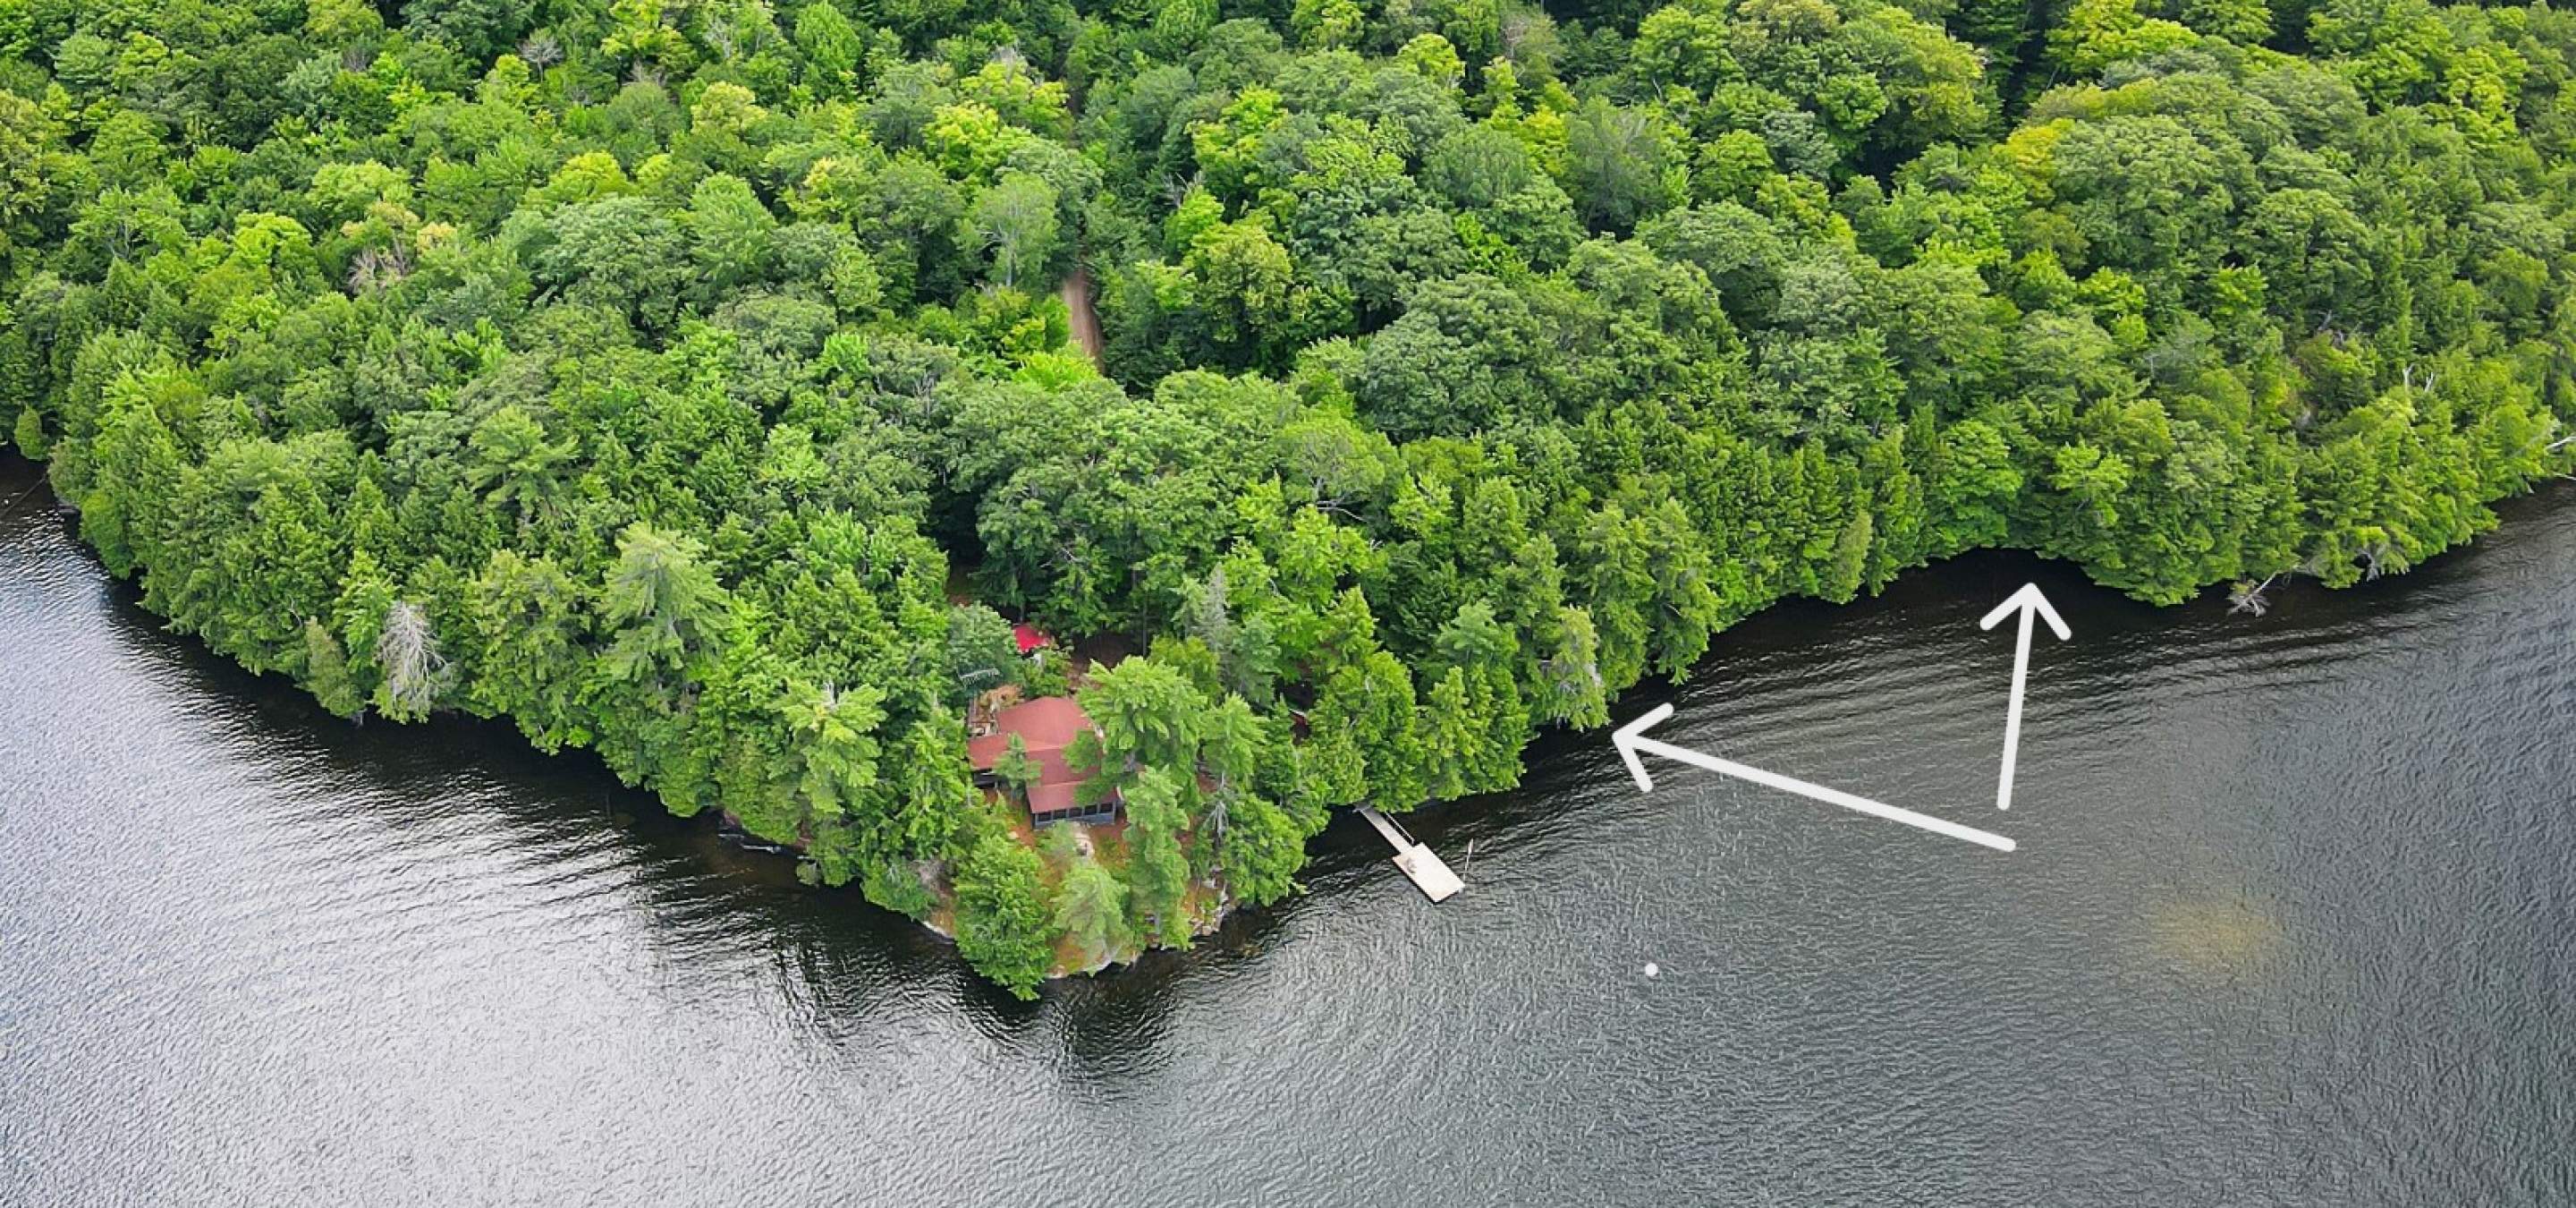 Forested property on a lake with a red roof cottage on a point and dock in the water.